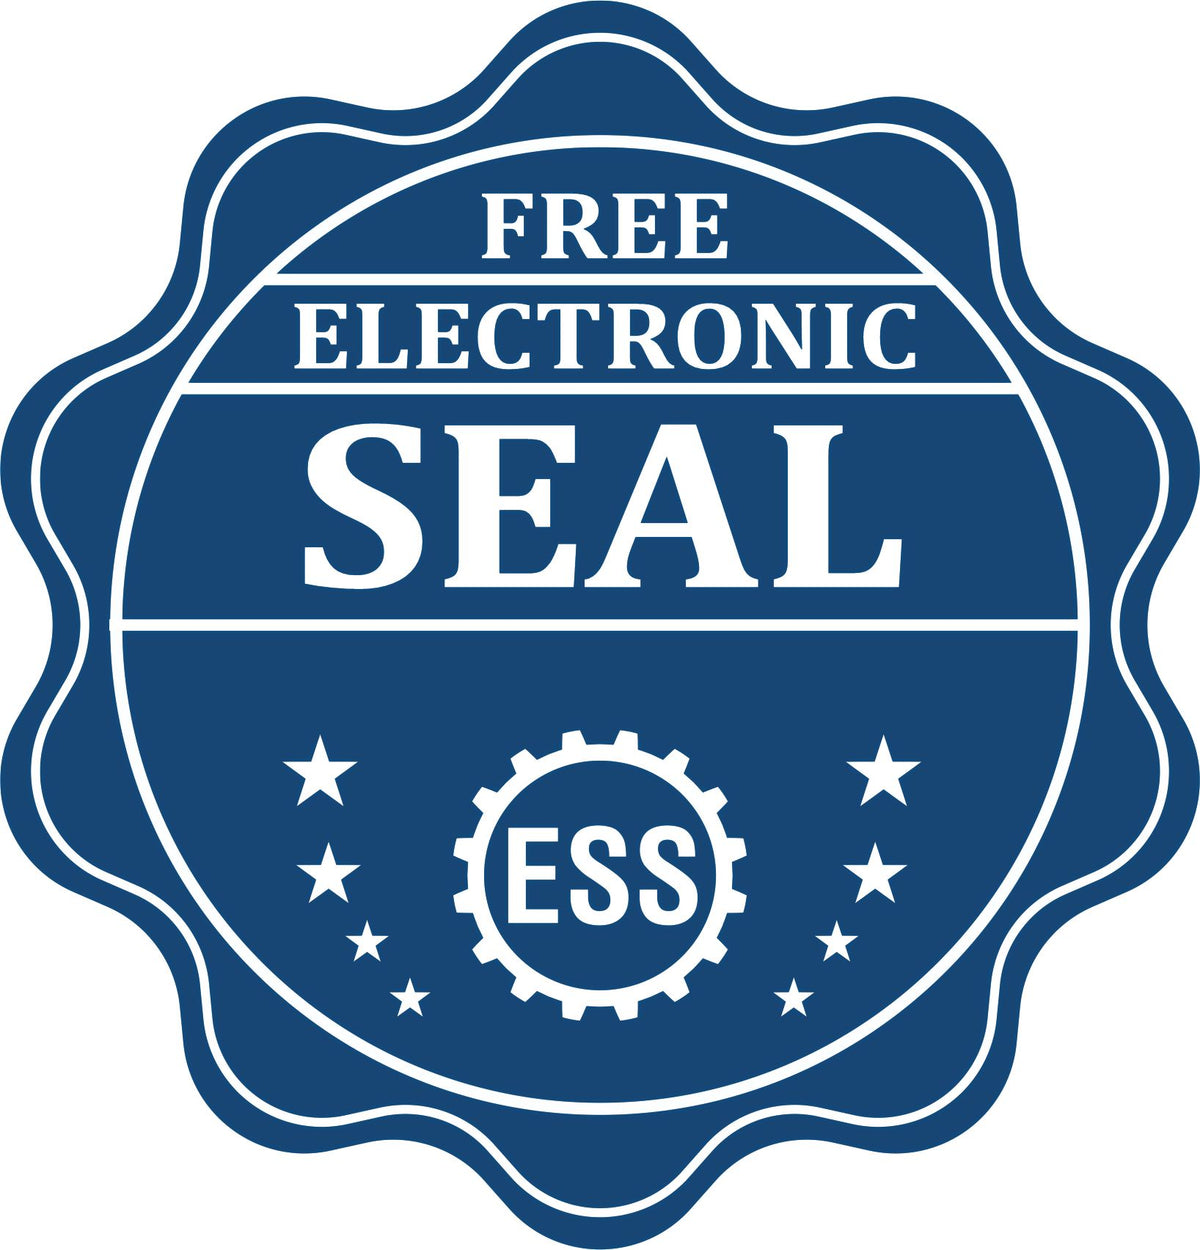 A badge showing a free electronic seal for the Handheld Iowa Professional Engineer Embosser with stars and the ESS gear on the emblem.